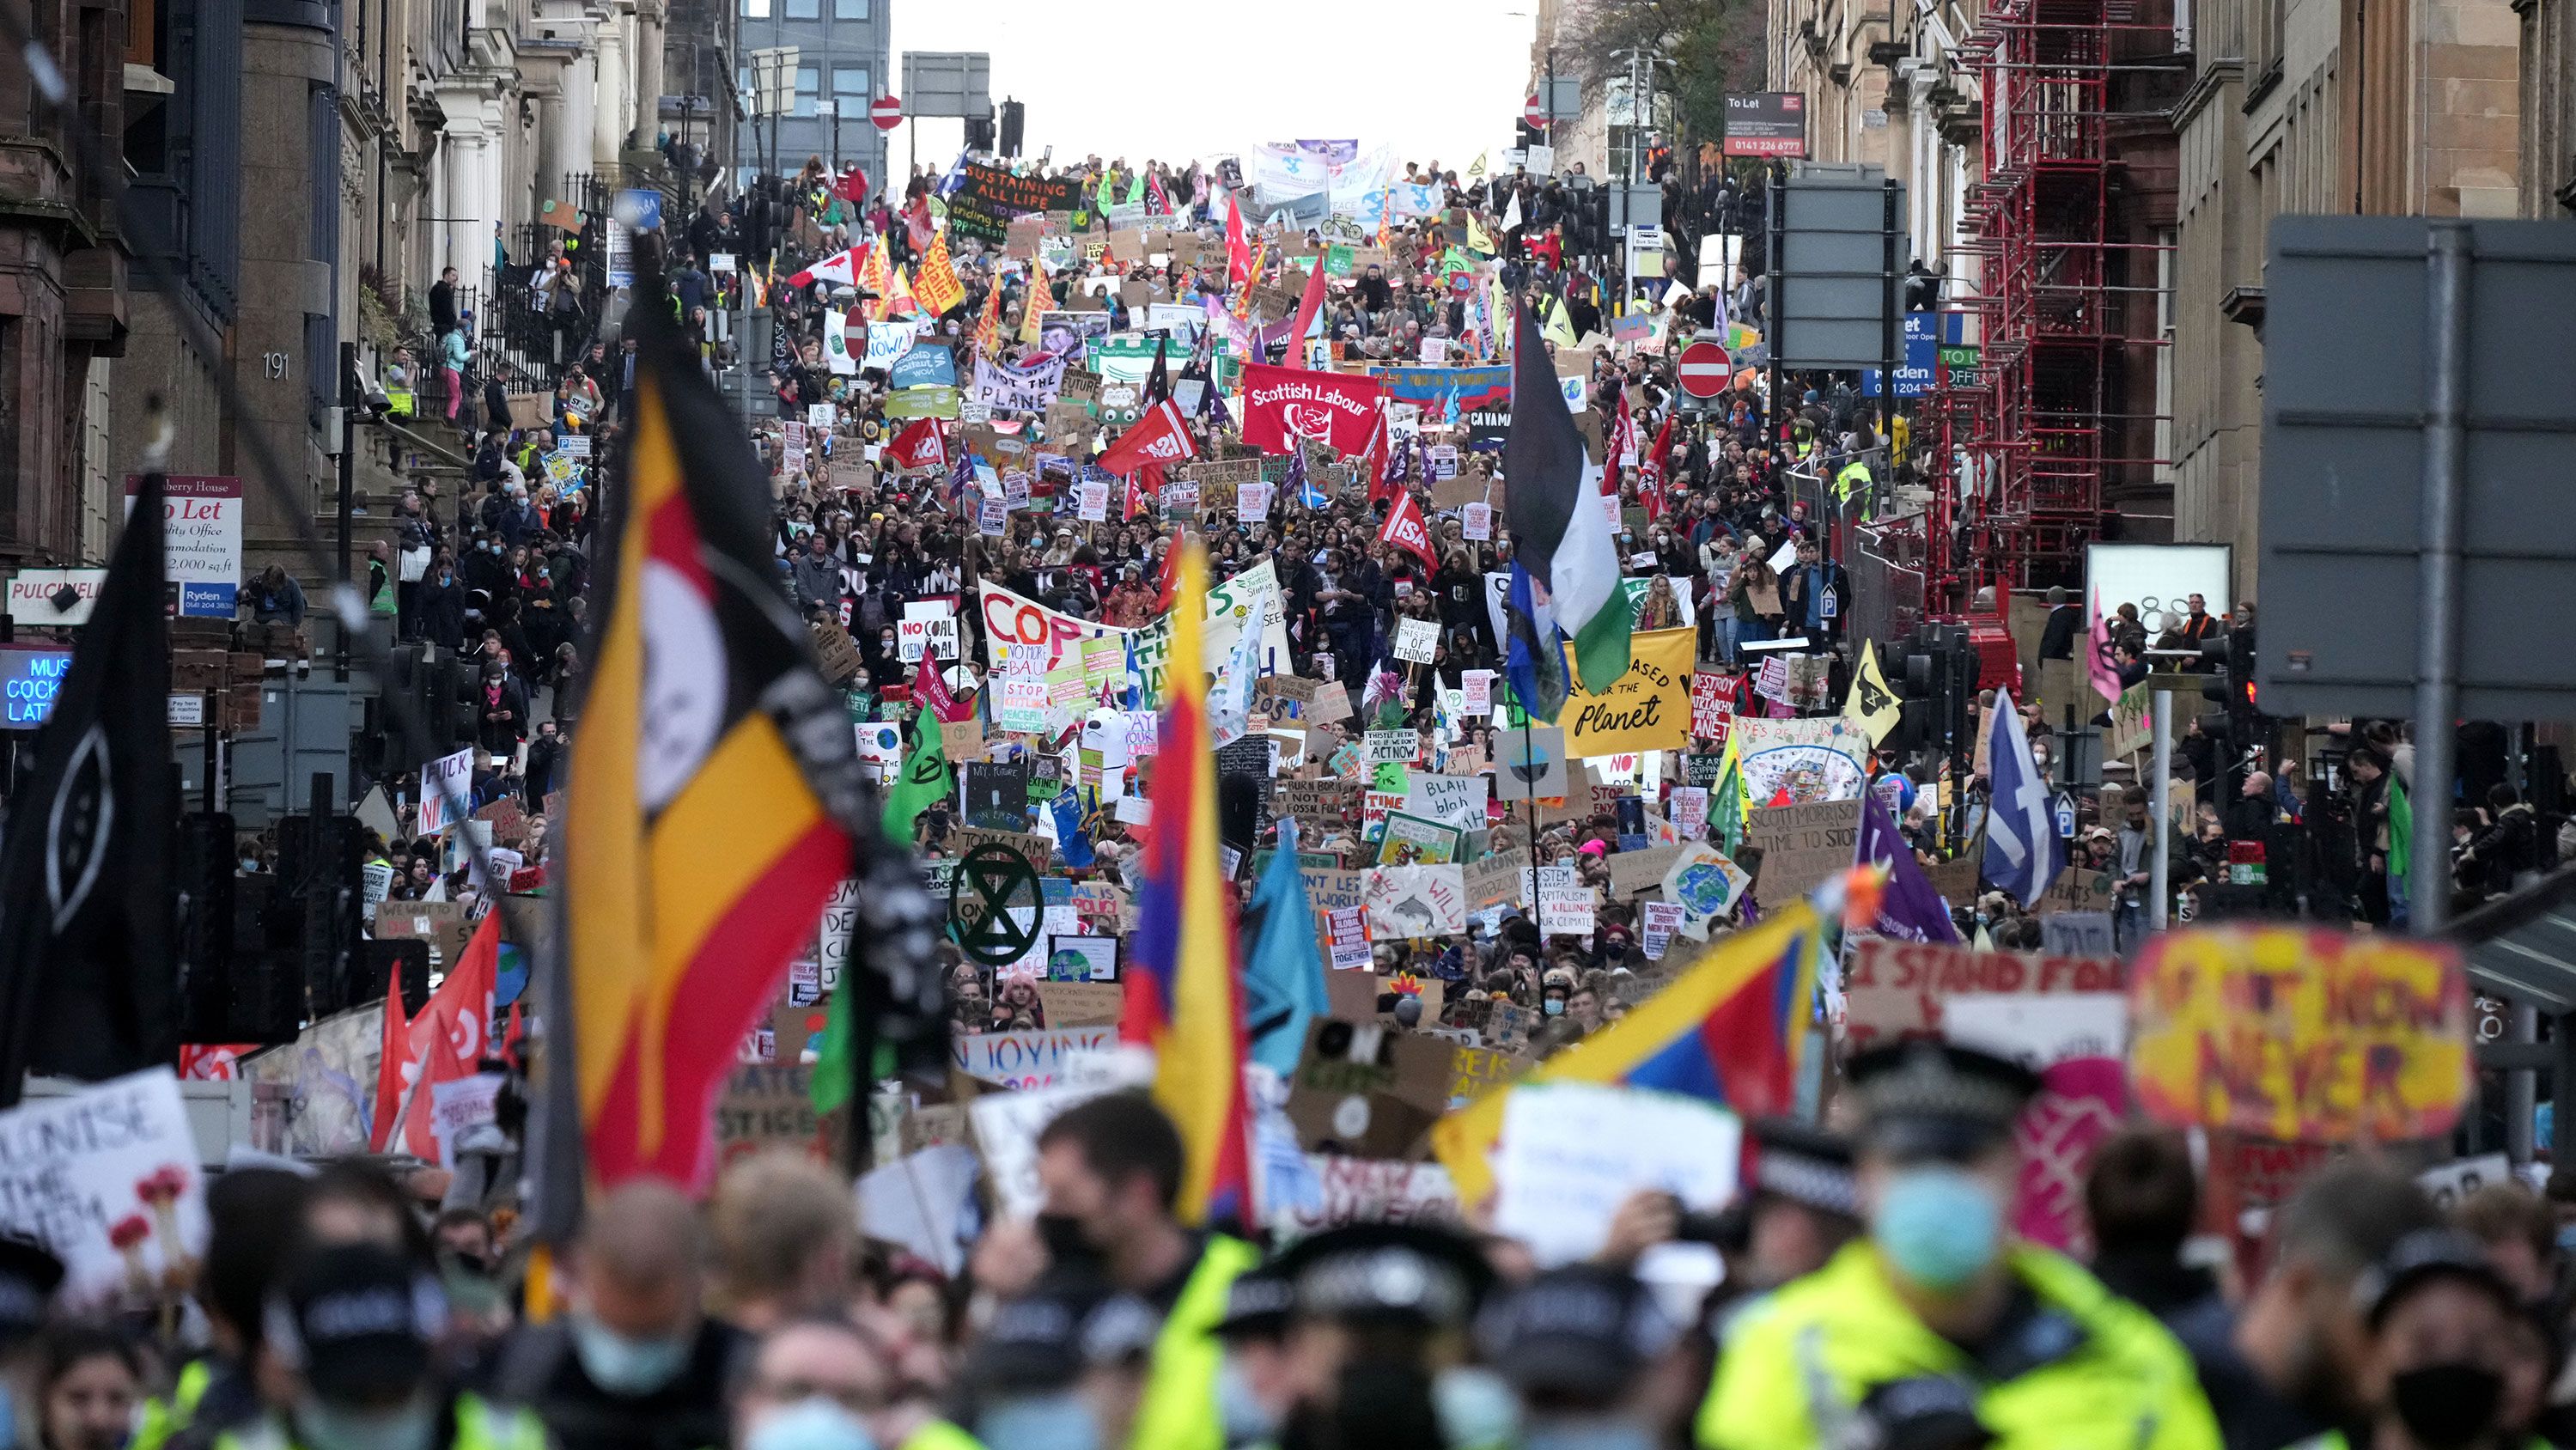 Demonstrators march through Glasgow on Friday to demand action on the cliamte crisis.